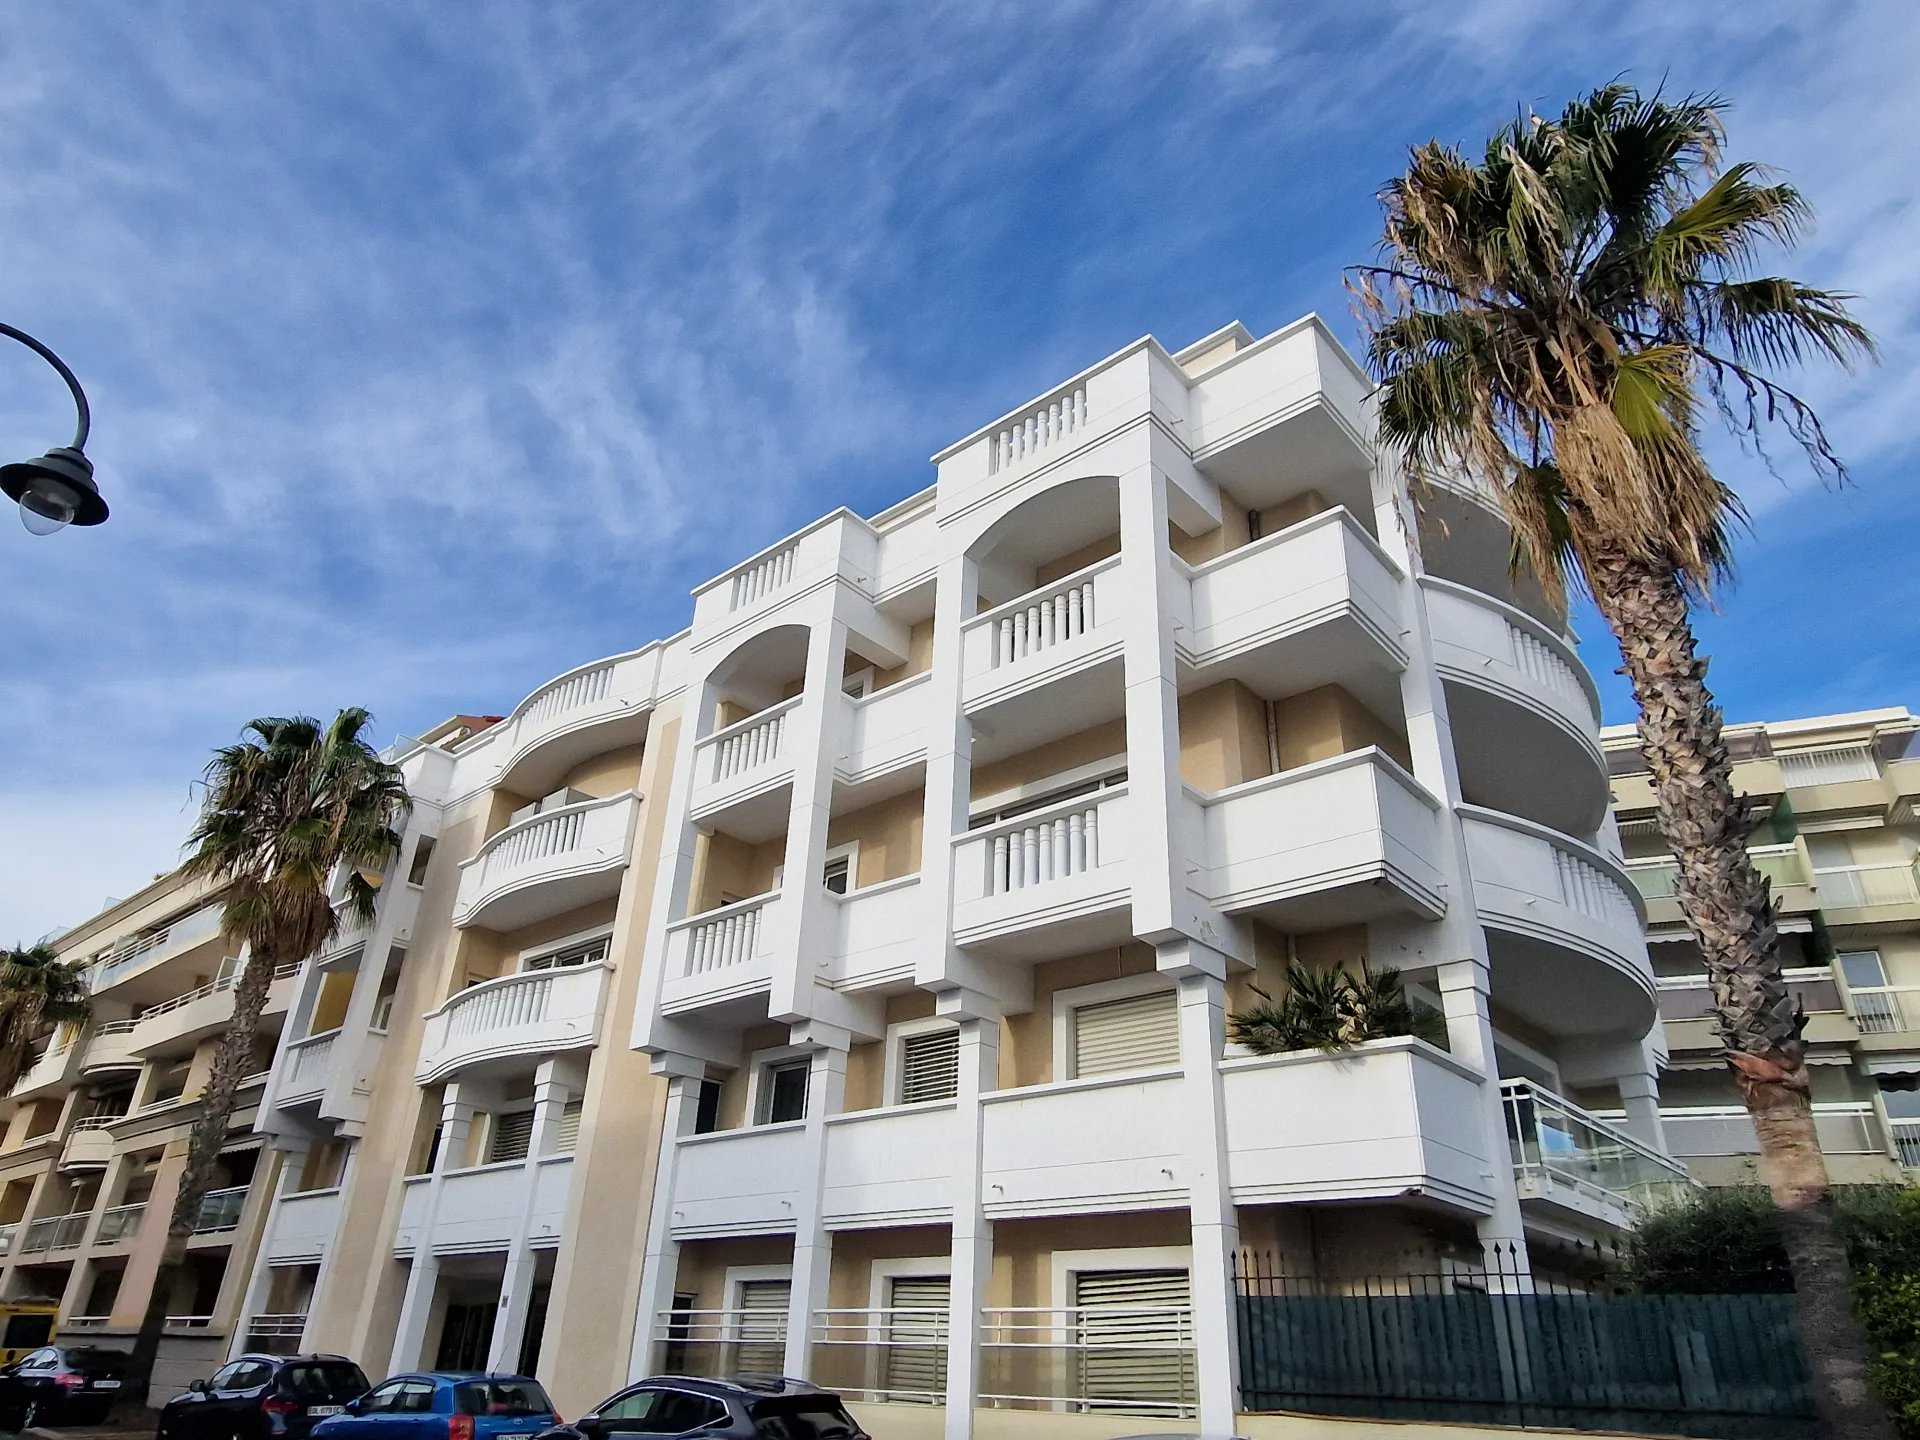 residencial no Cannes, Alpes-Maritimes 12404444